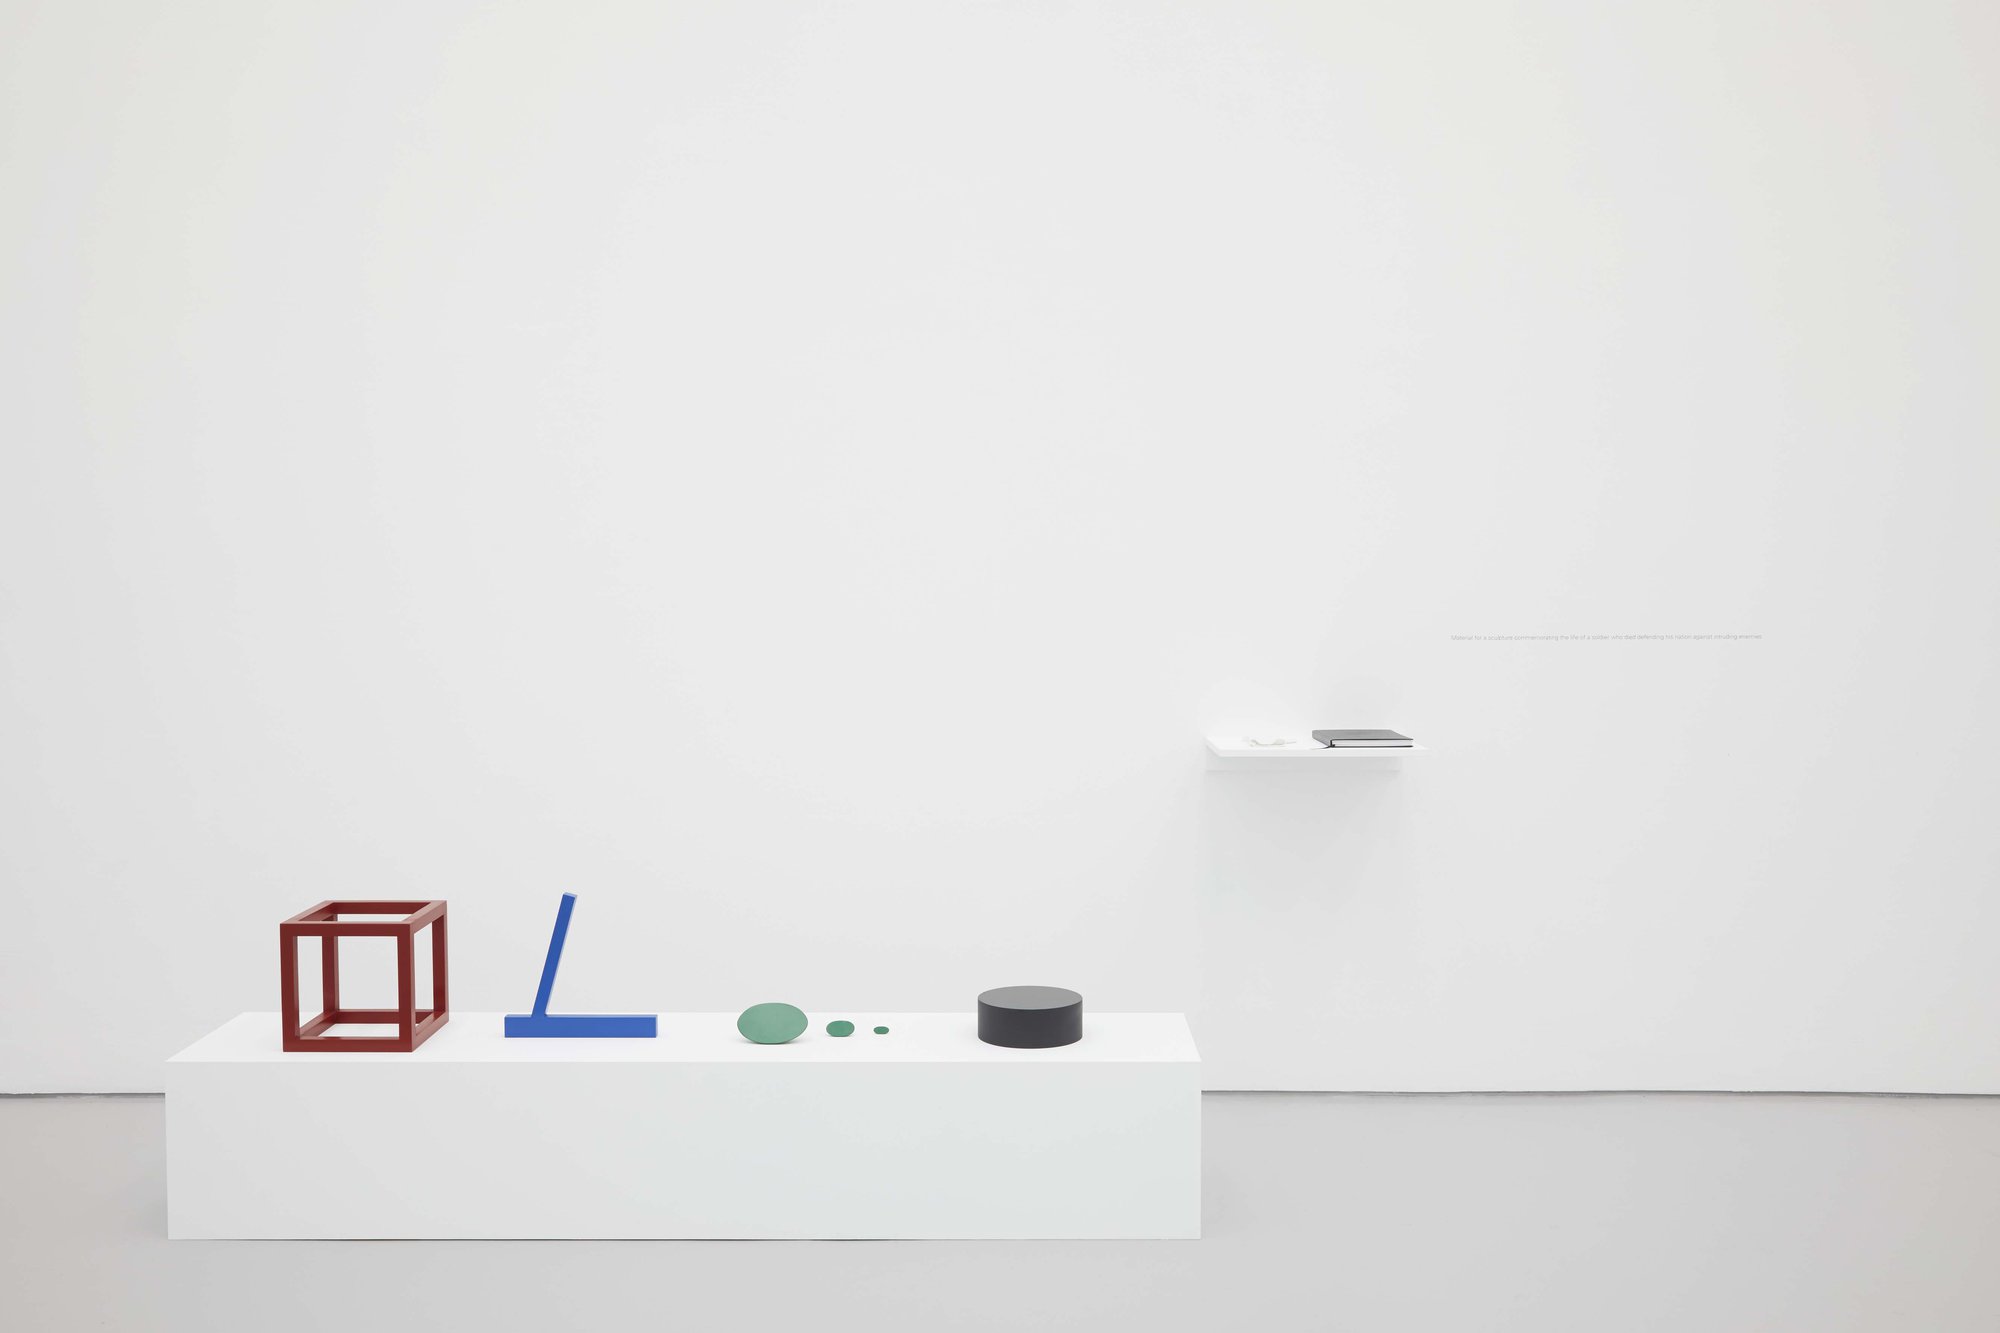 Iman Issa, Material for a sculpture commemorating the life of a soldier who died defending his nation against intruding enemies, four painted wooden sculptures, painted wooden plinth, painted wooden shelf, blank book with four inserts, vinyl text on wall, 2012